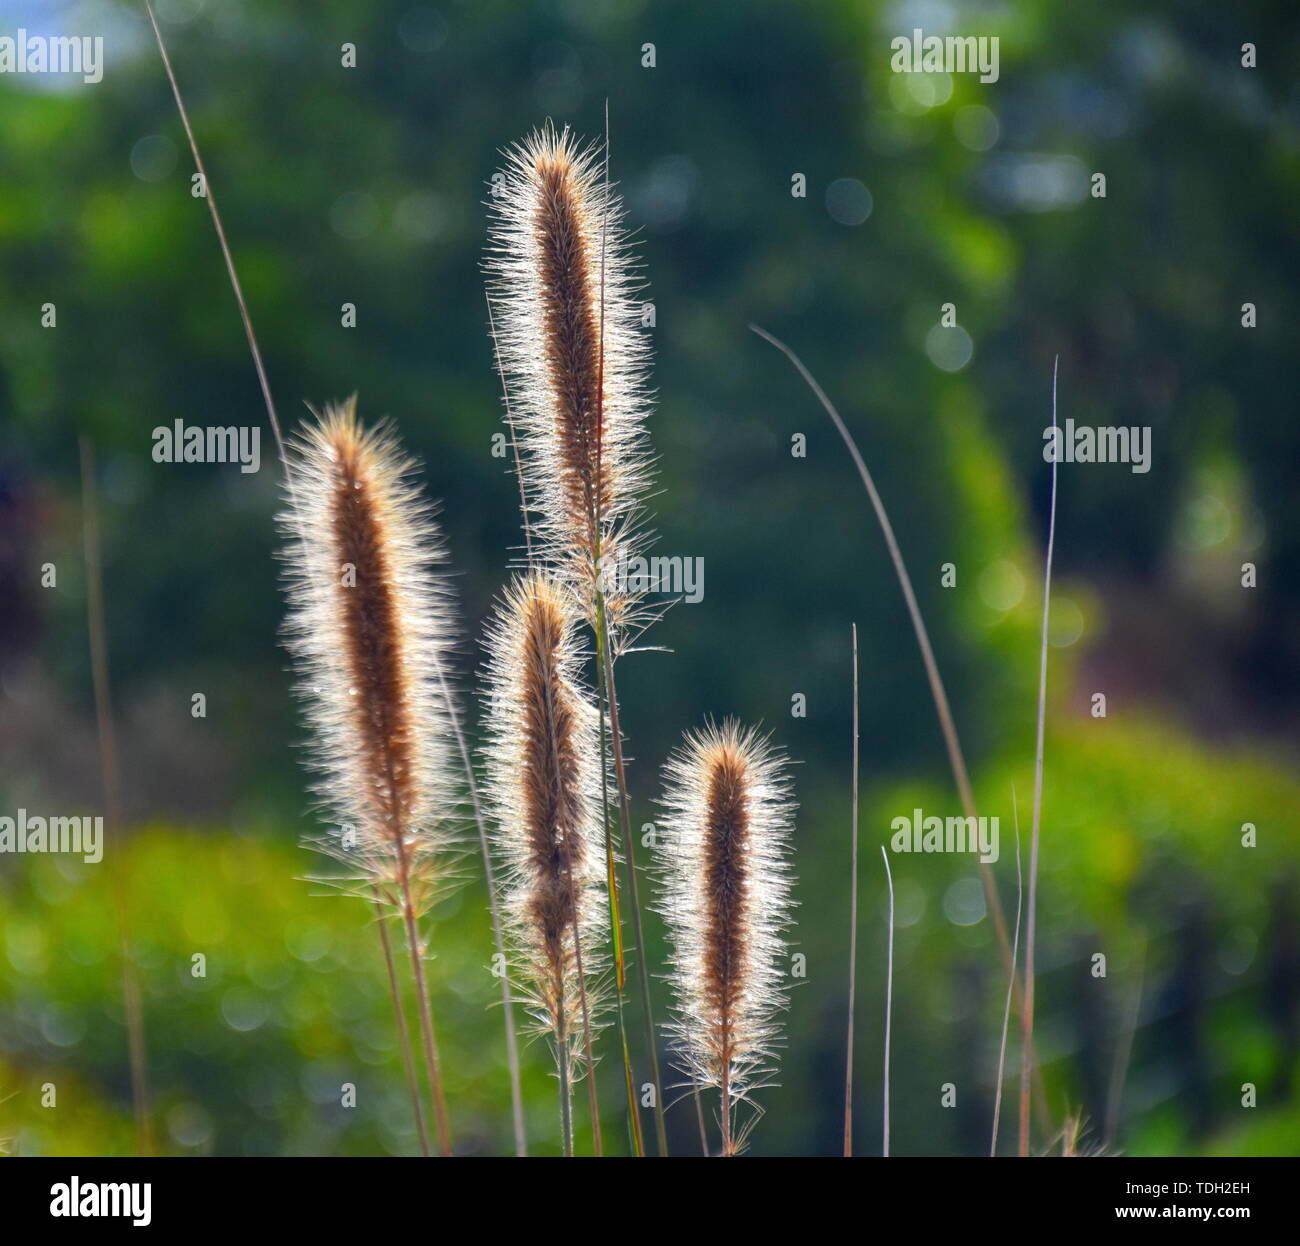 Sunlight shining through the feathery flowerheads of the native Australian grass Swamp Foxtail, Cenchrus purpurascens. Also known as Fountain Grass. Stock Photo